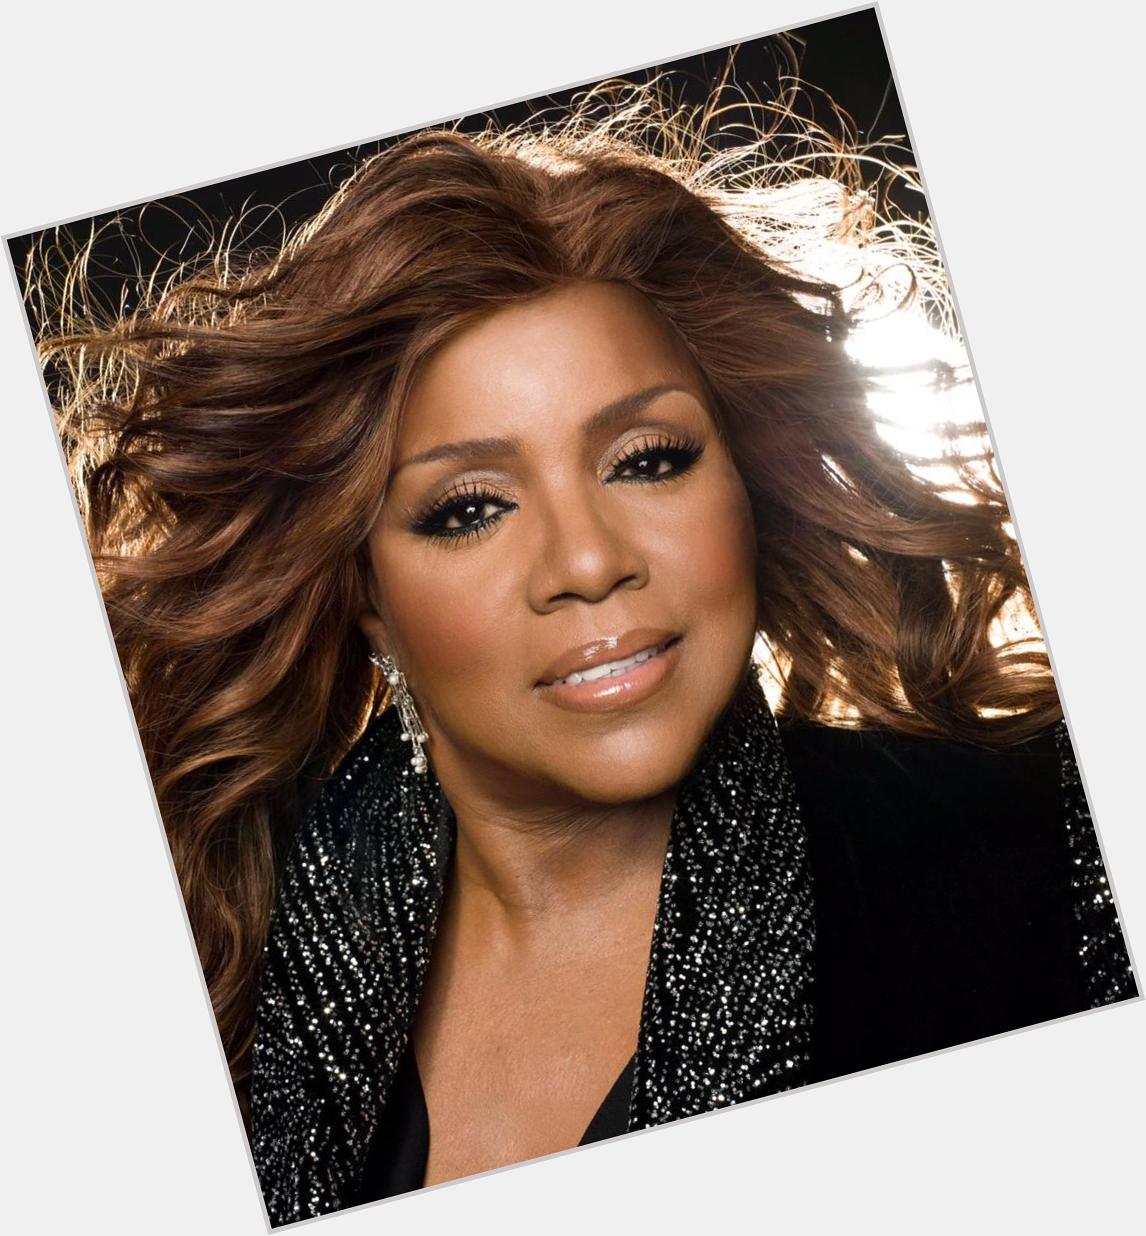   HAPPY BIRTHDAY TO GLORIA GAYNOR!   May we all \"SURVIVE\" for many years to come.  